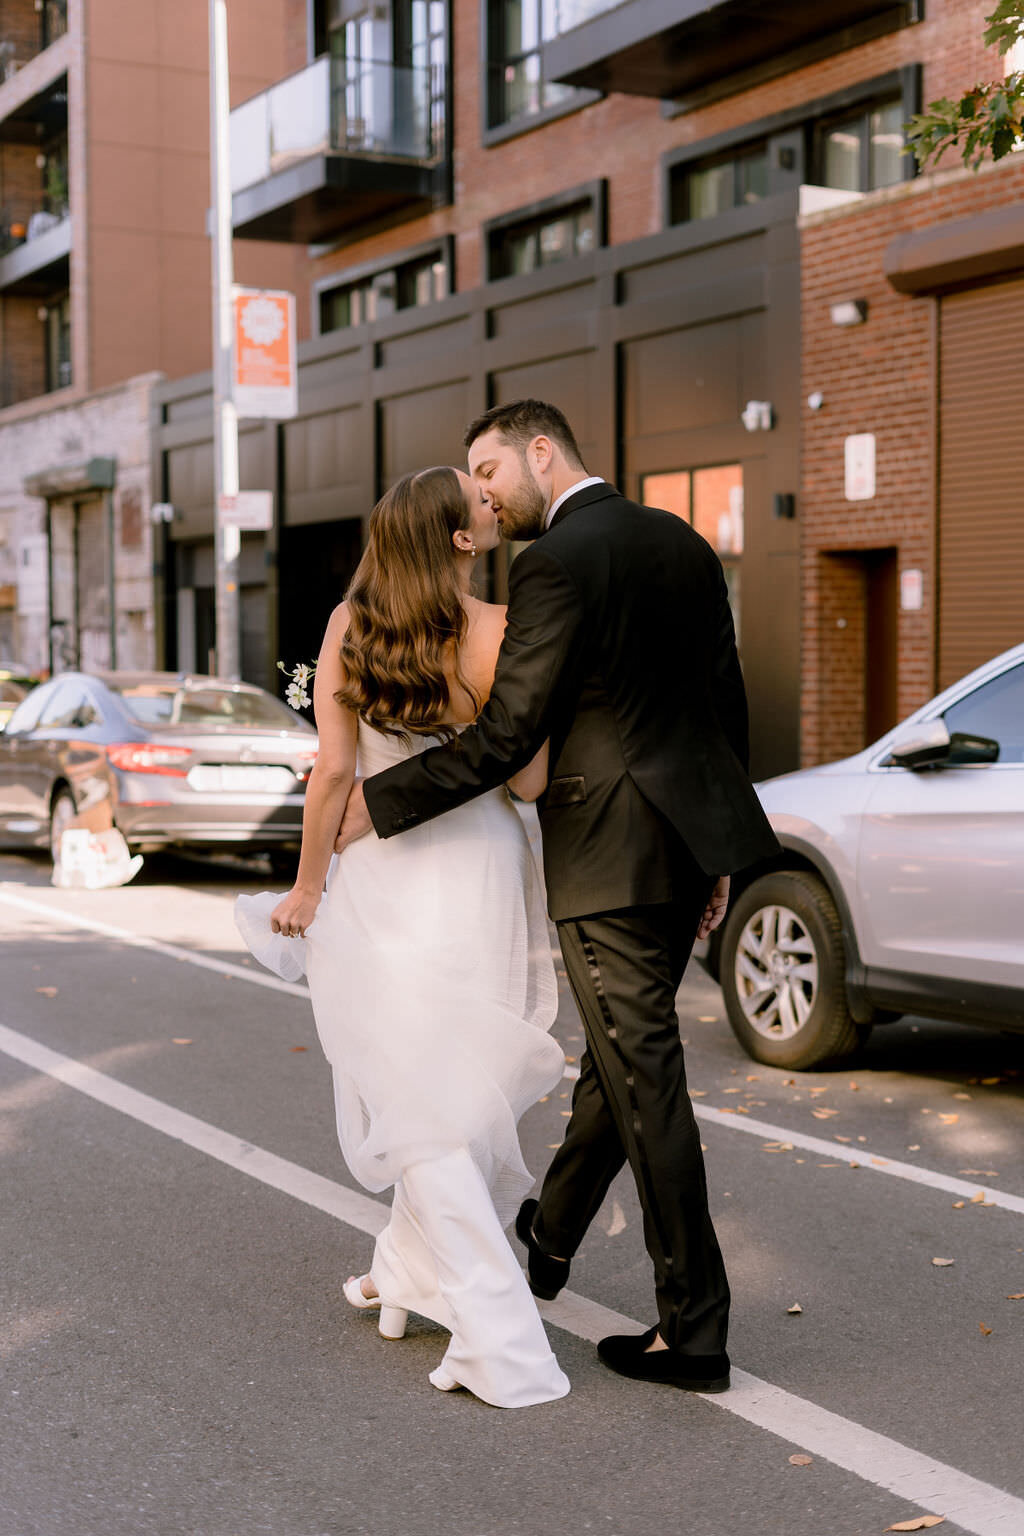 groom with his arm around bride as they walk down a street and kiss